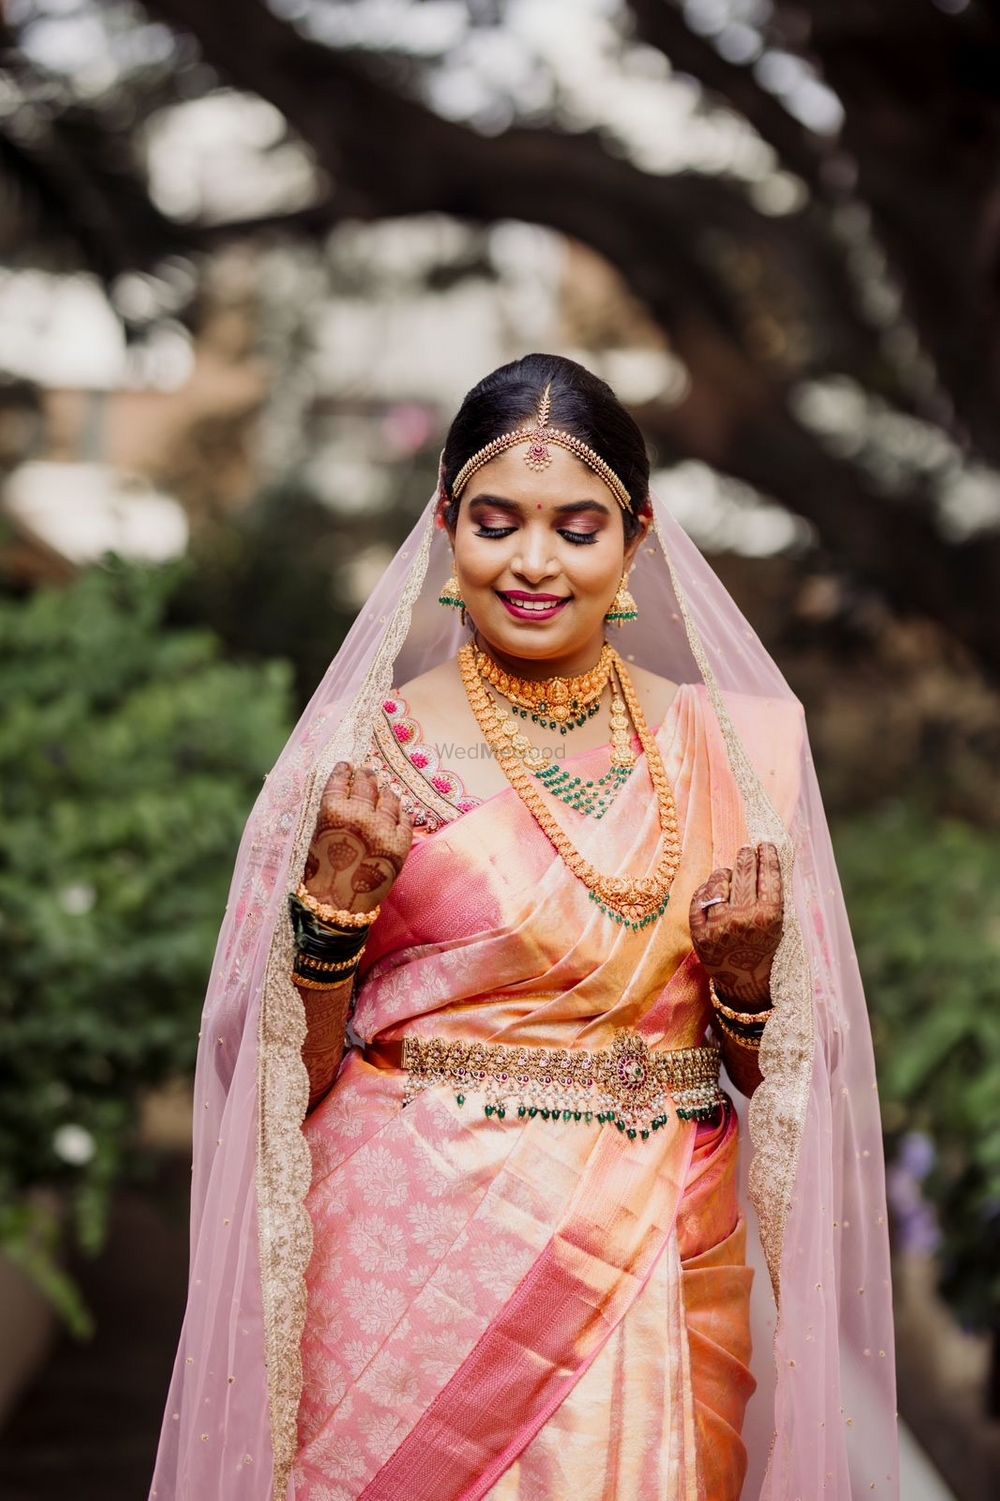 Photo By Makeover by Poorvi Gowda - Bridal Makeup